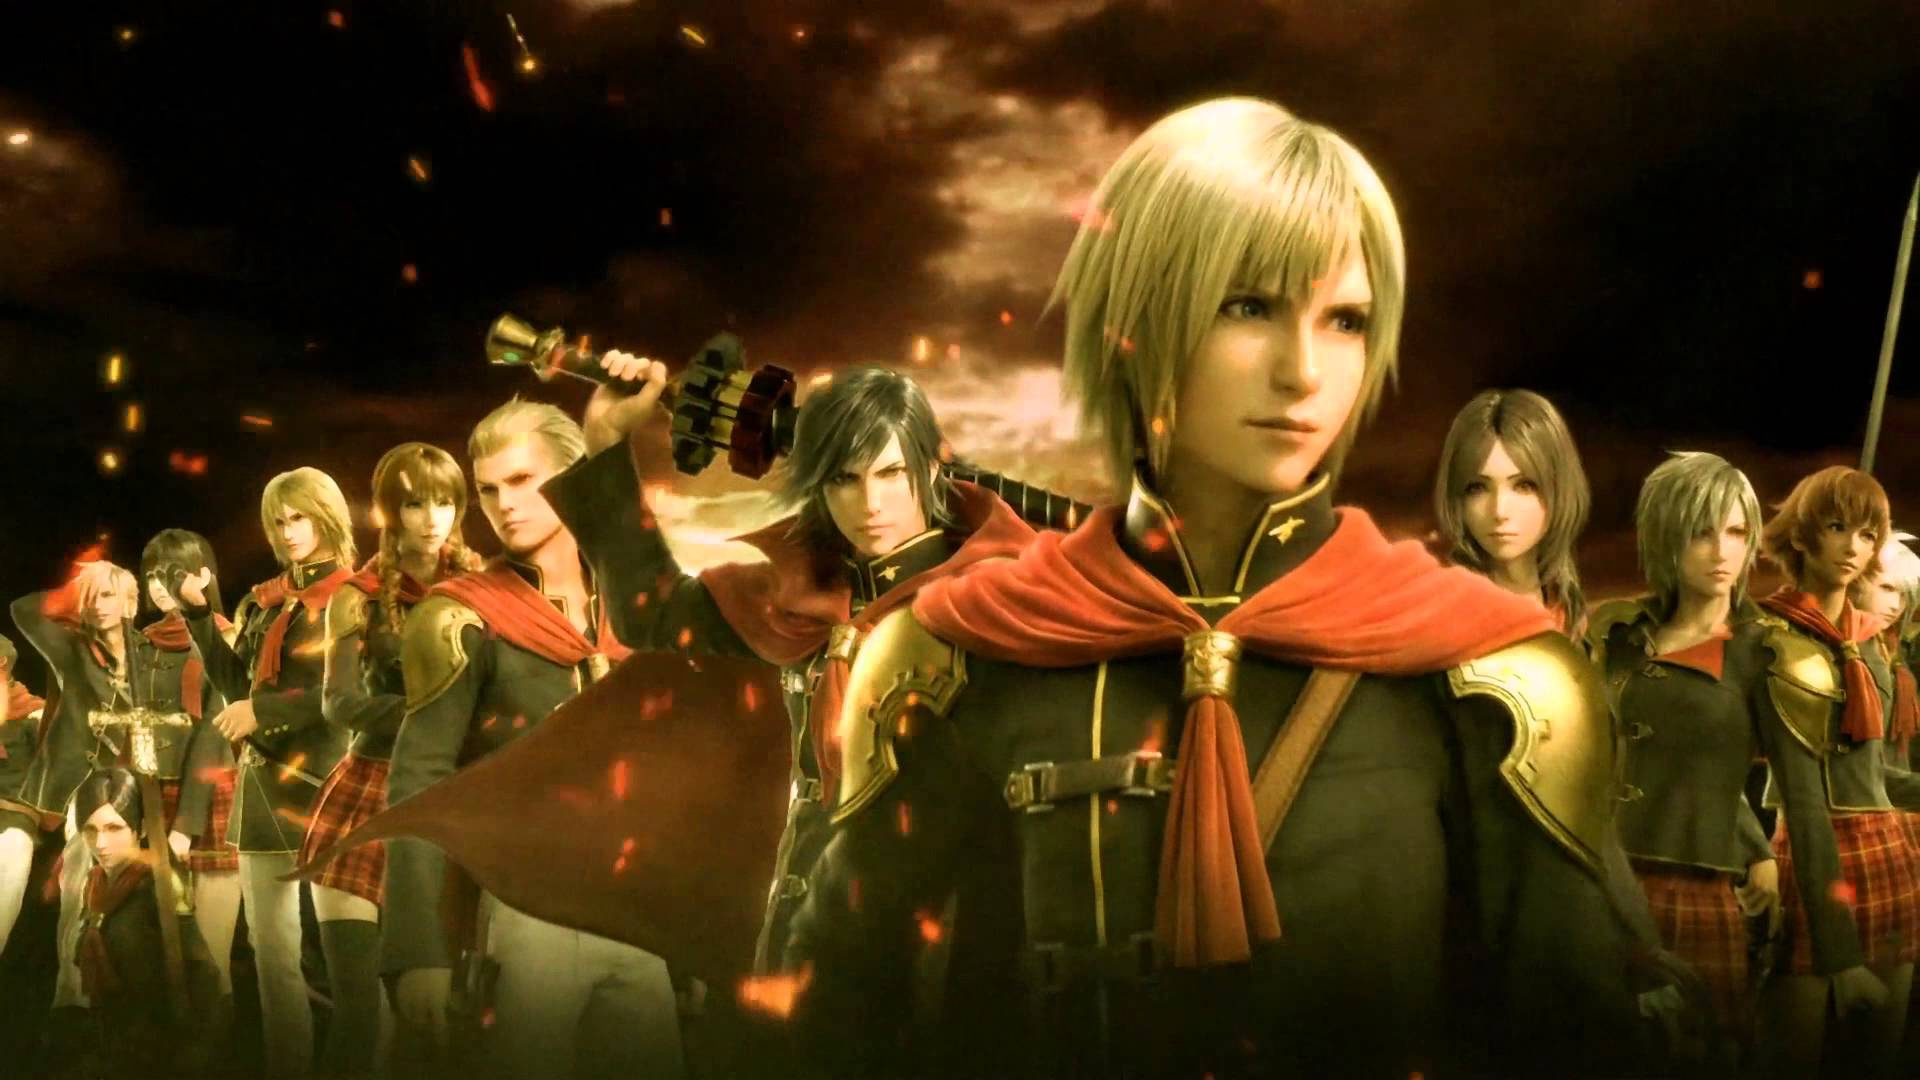 Final Fantasy Type-0 HD's Motion Blur Making You Sick? There's a Patch